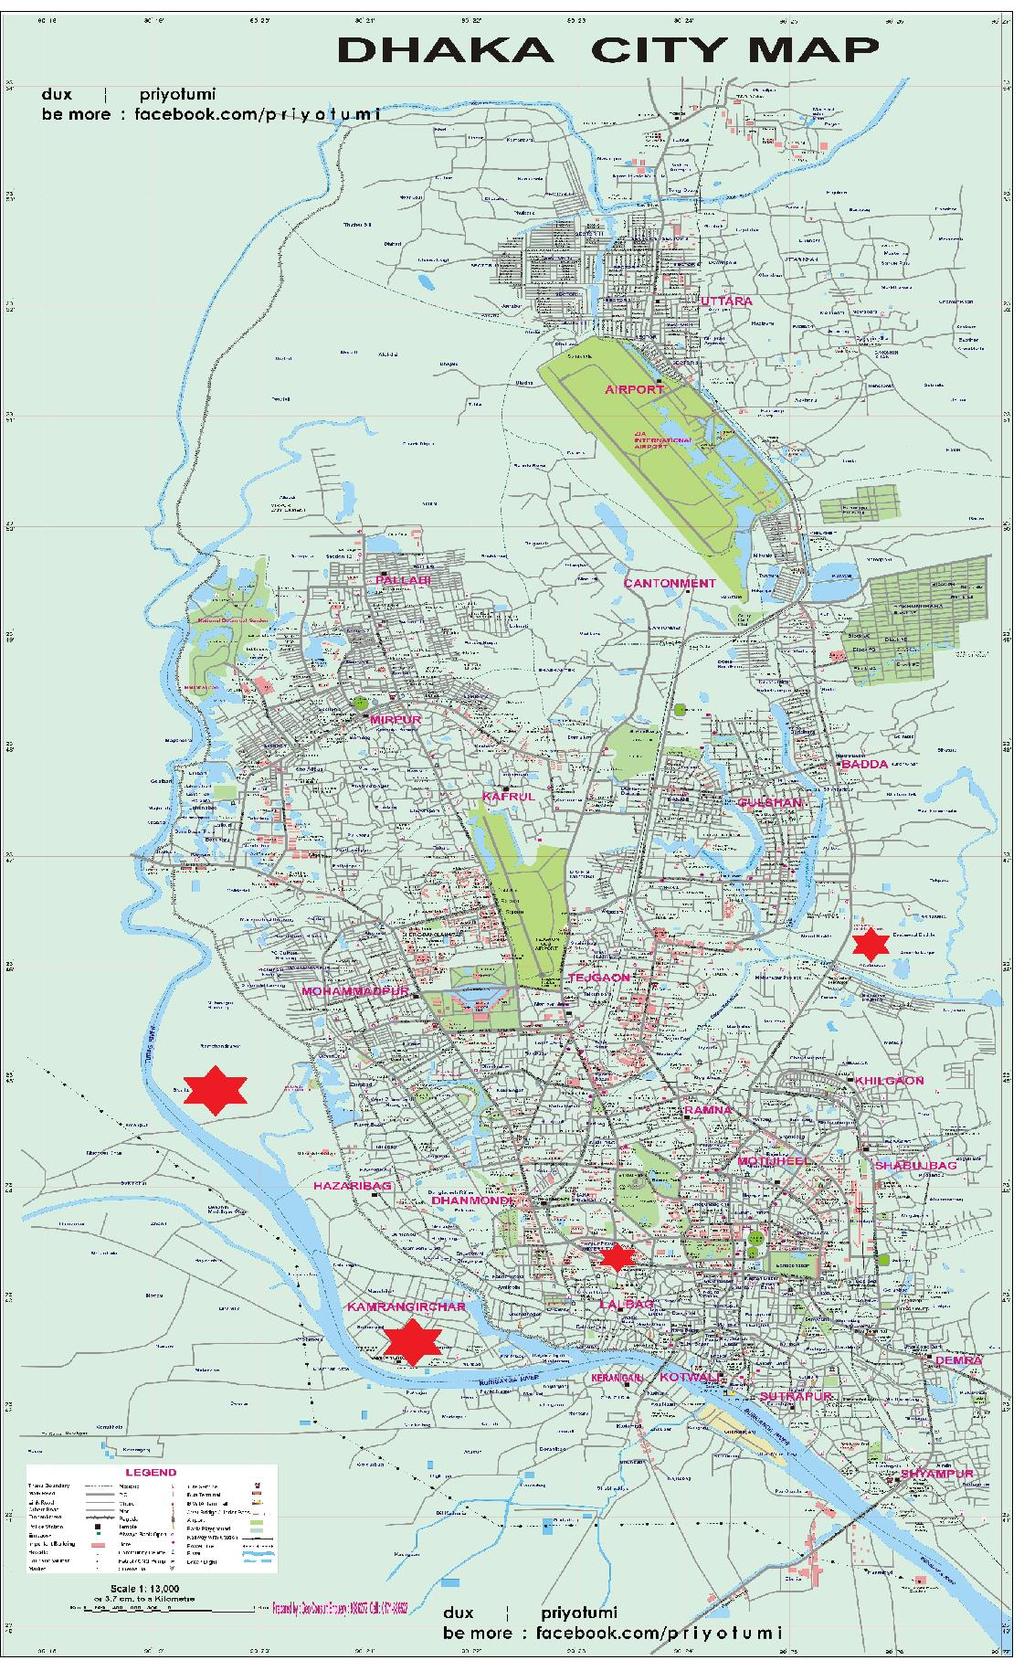 Figure 3: shows the points (red star marked) of the study area of Dhaka city. The details of the data collection points are discussed below.